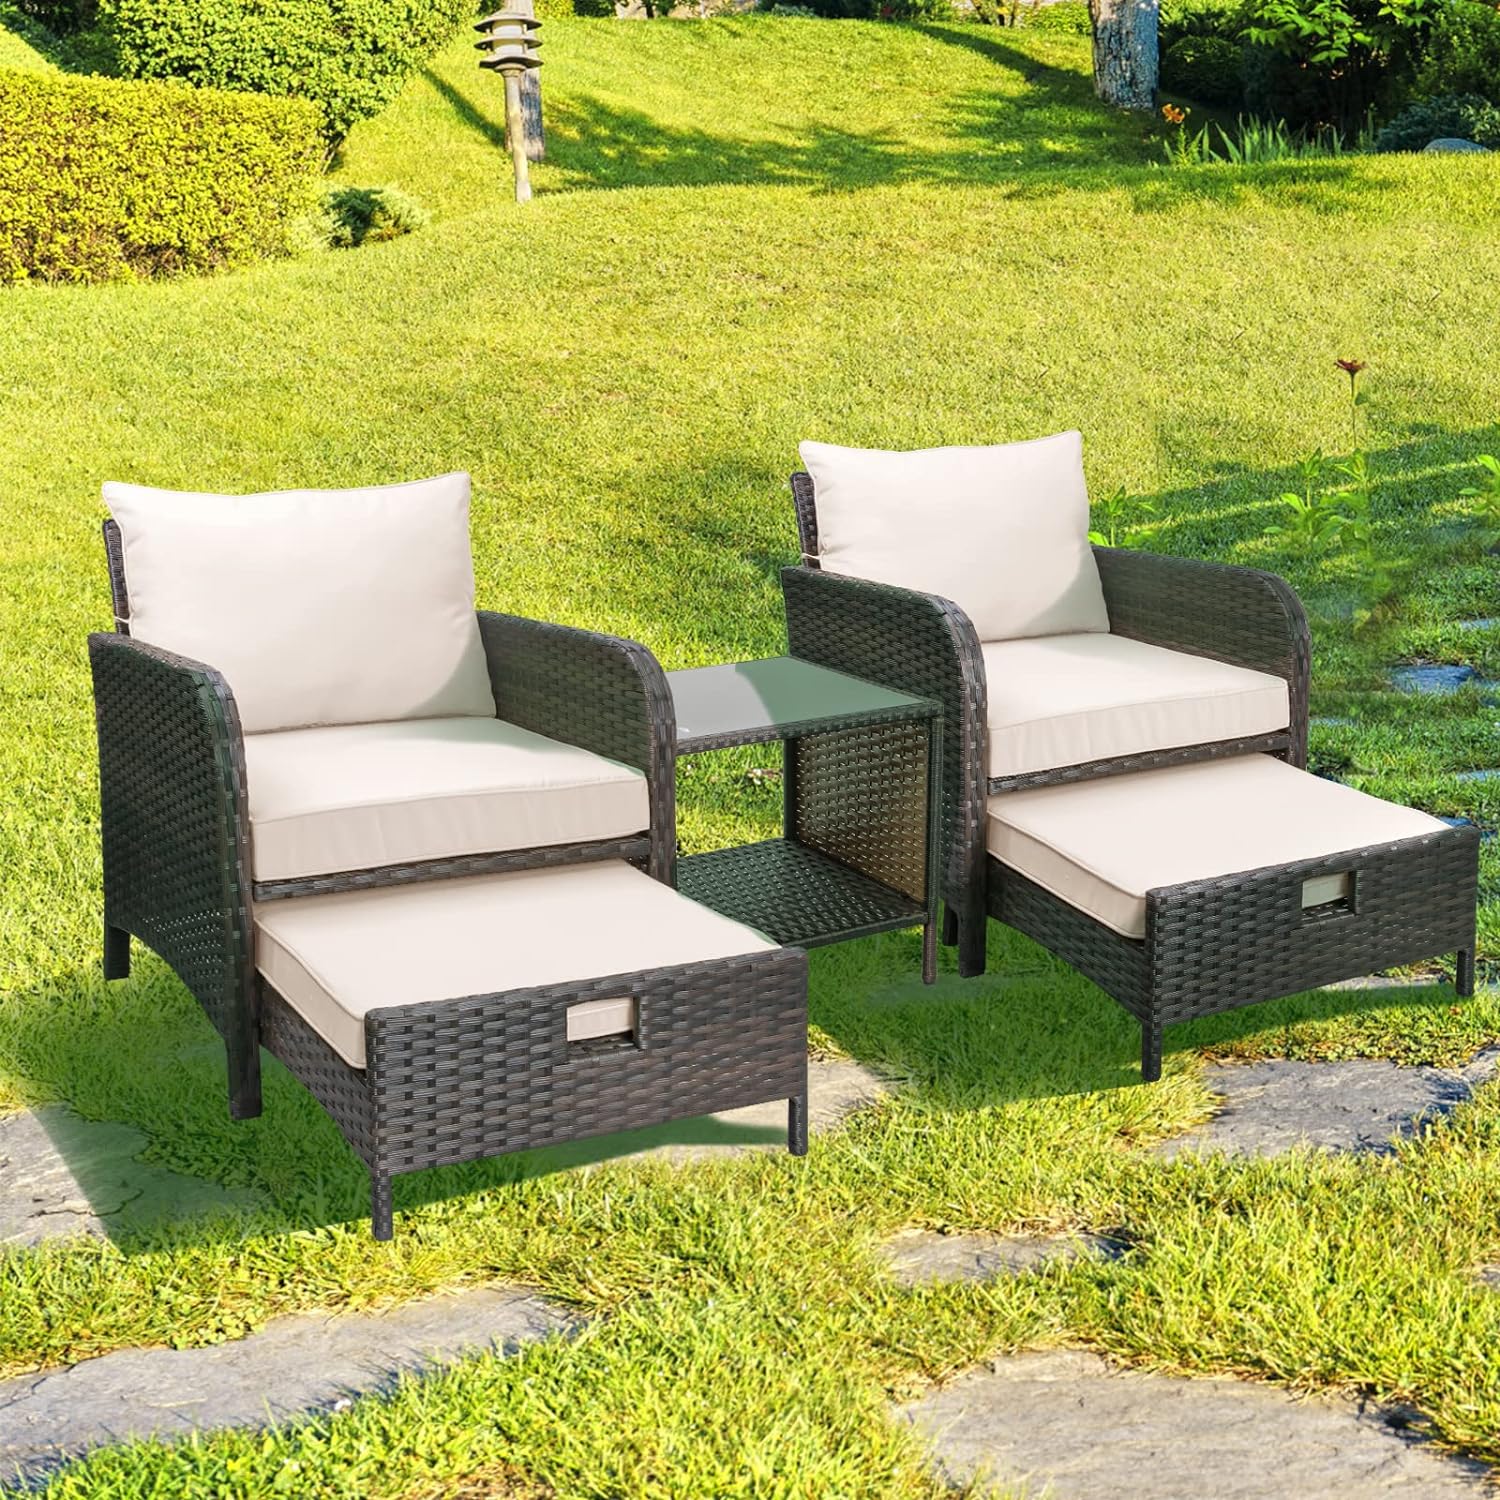 5 Piece Patio Conversation Set with Wicker Rattan Outdoor Lounge Chairs, Soft Cushions, Ottoman, Glass Table